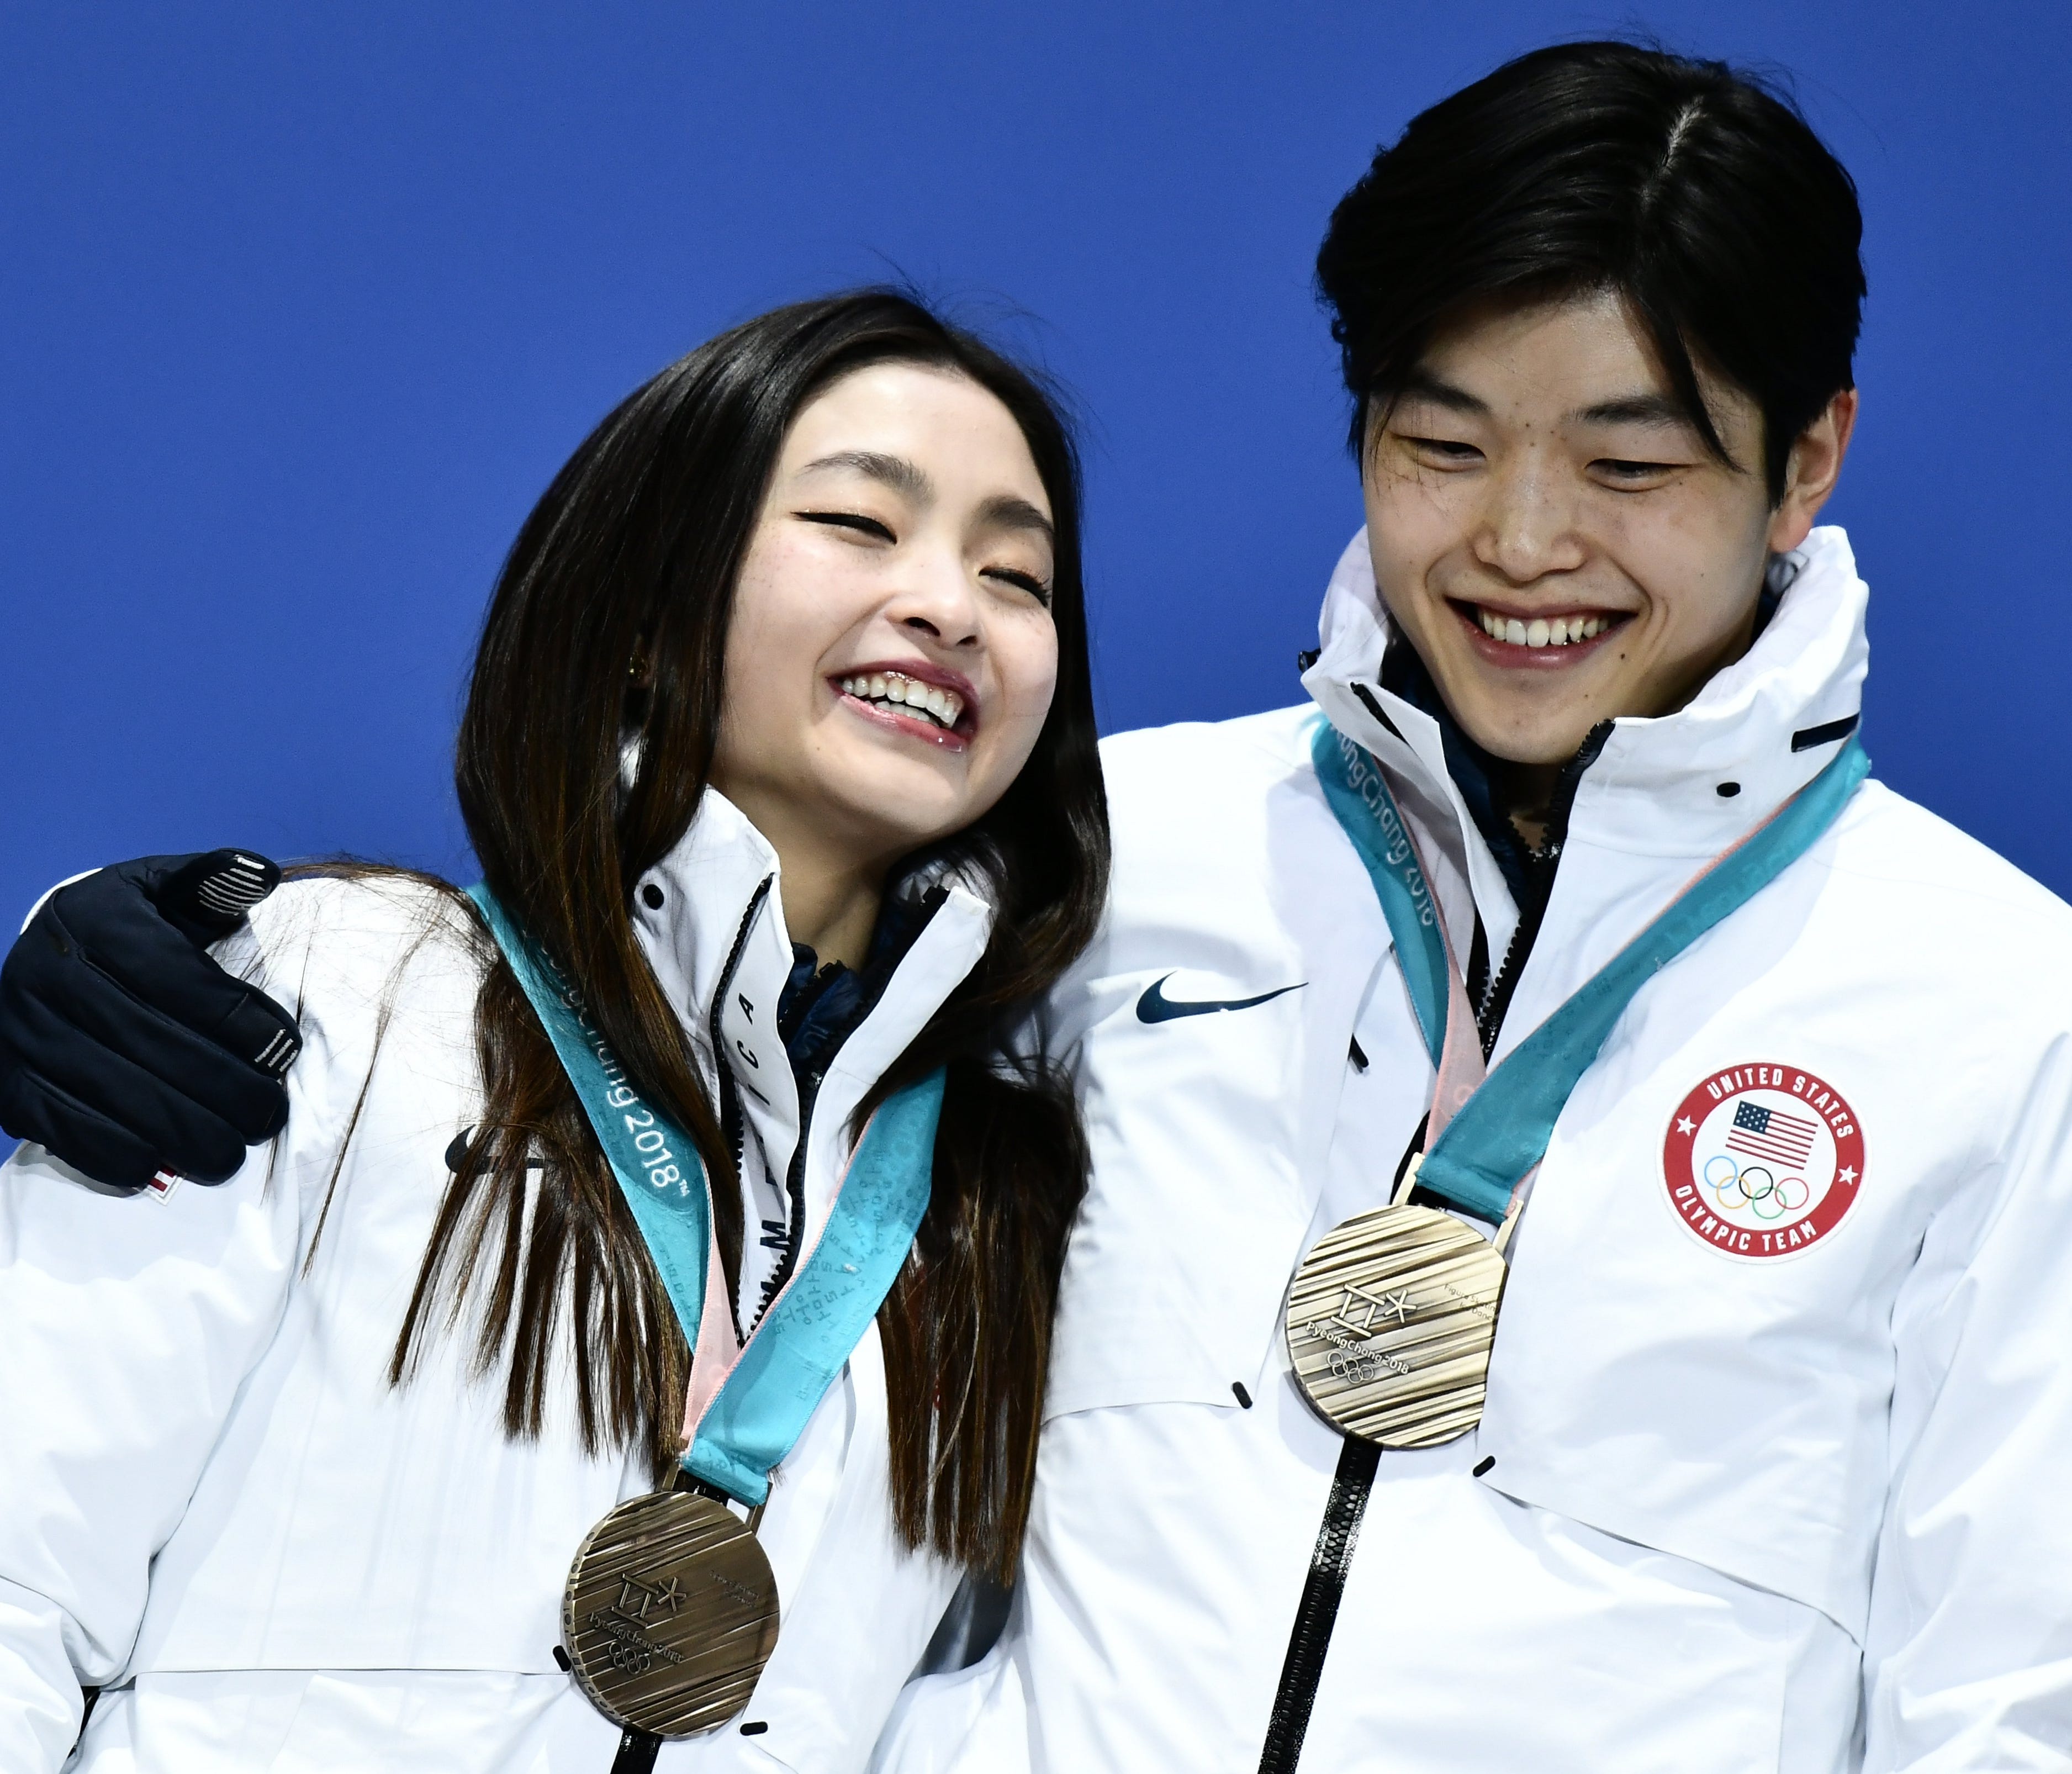 epa06545773 Bronze winners Maia Shibutani and Alex Shibutani of the USA (R) during the medal ceremony for the Figure Skating Ice Dance event during the PyeongChang 2018 Olympic Games, South Korea, 18 February 2018.  EPA-EFE/CHRISTIAN BRUNA